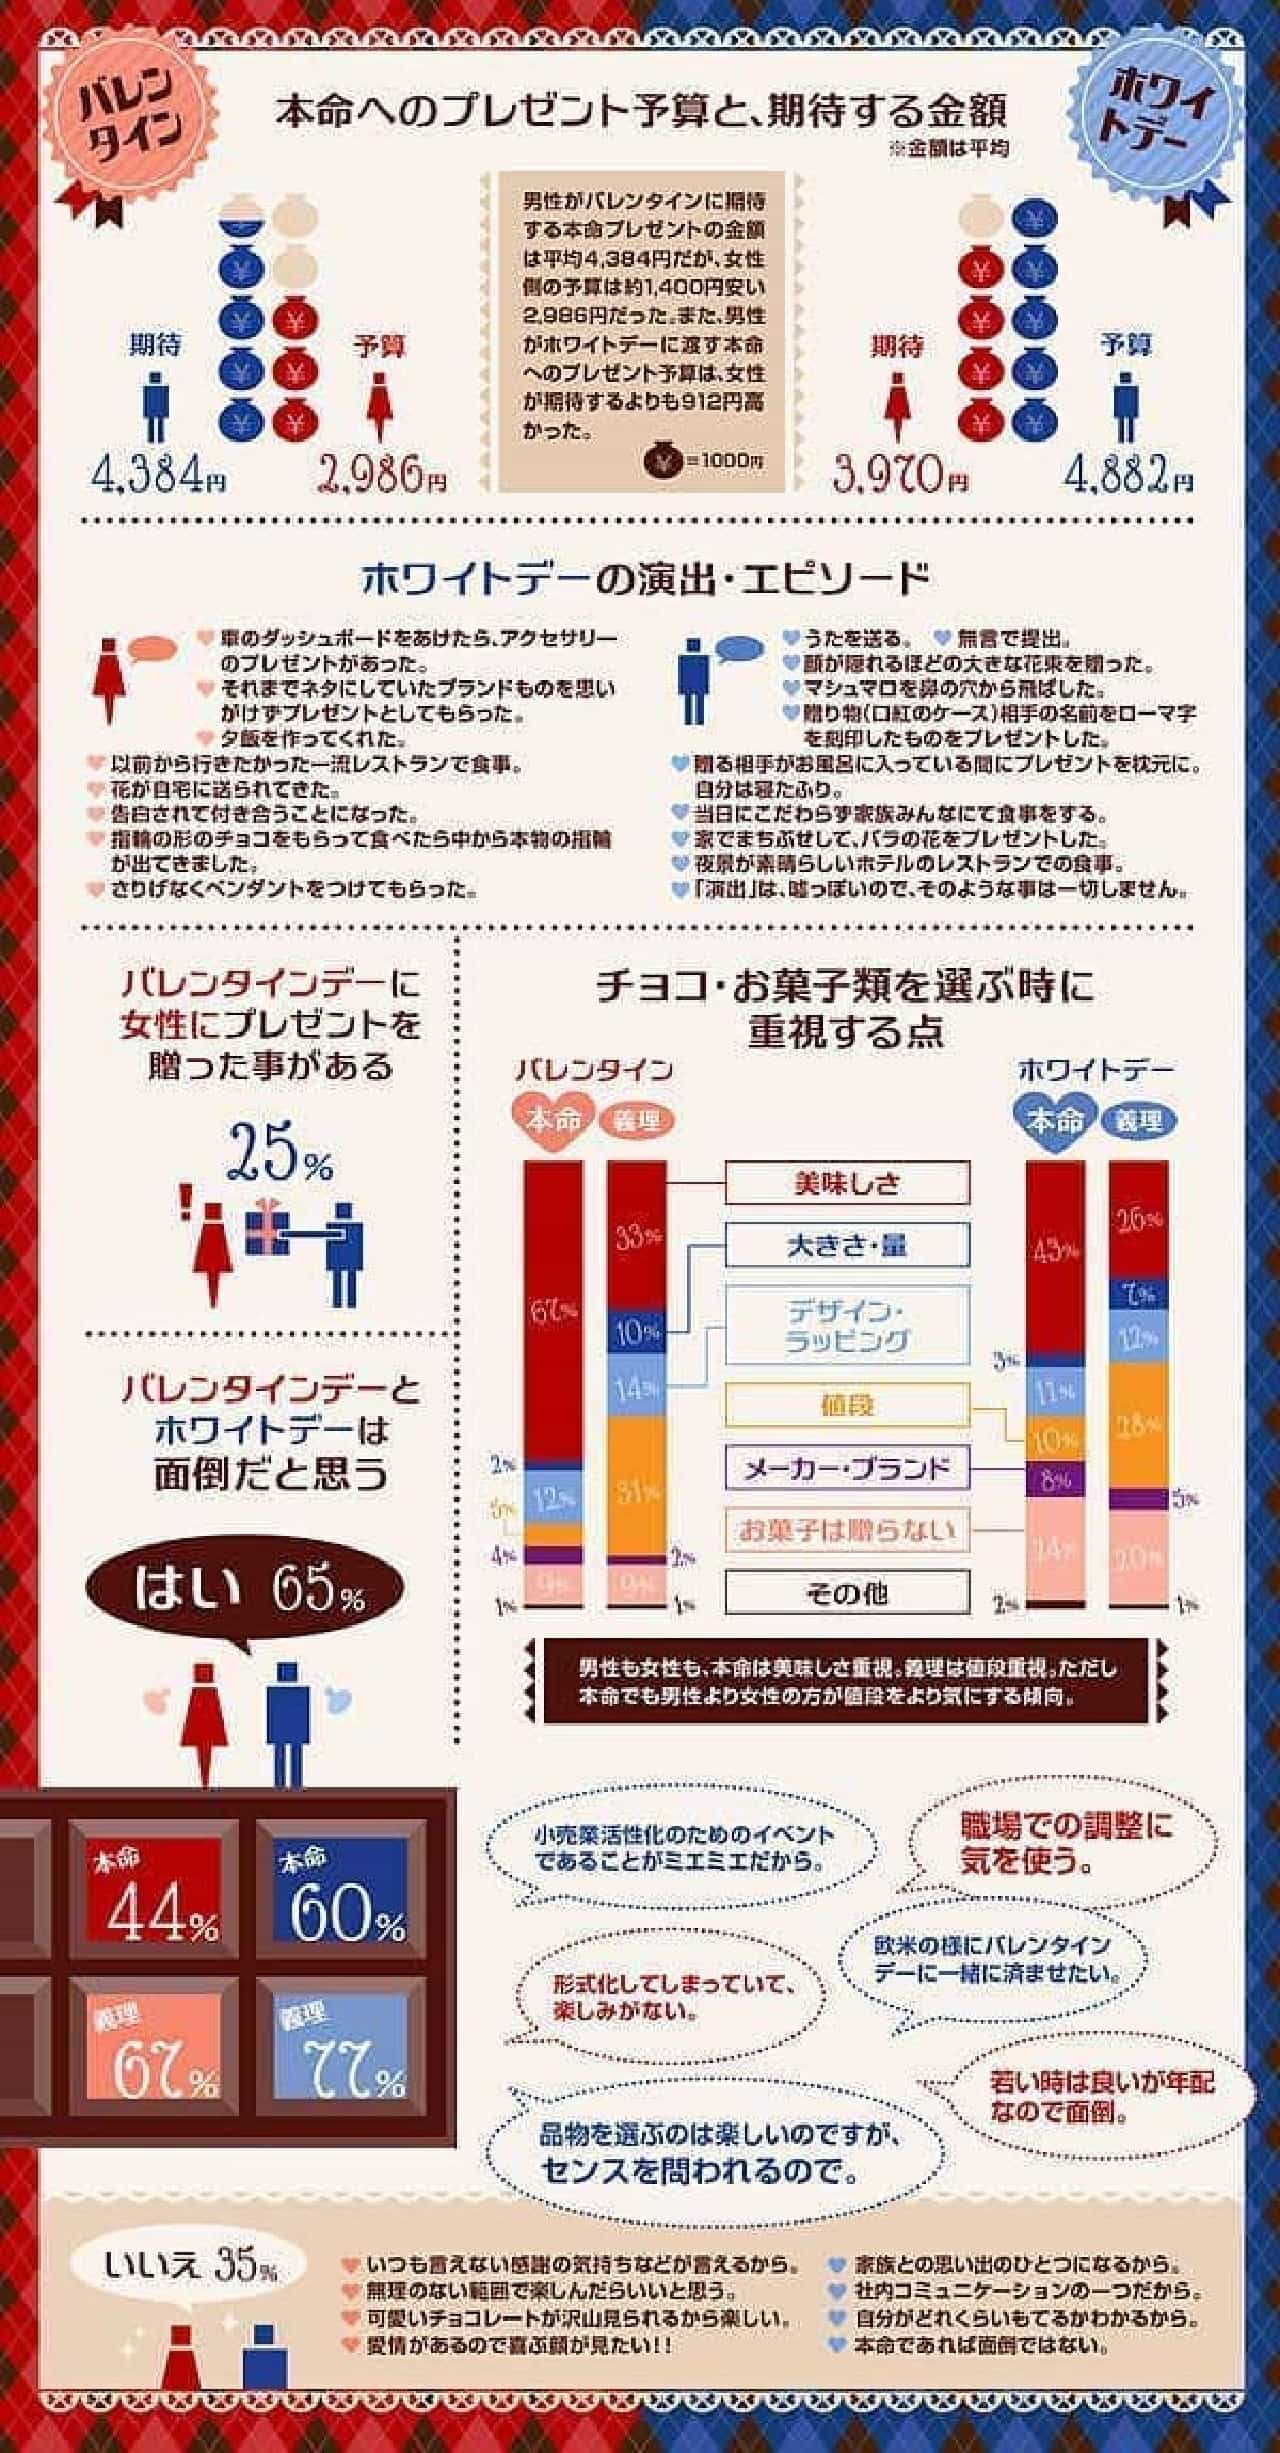 On Valentine's Day and White Day, 65% said "I think it's a hassle"!